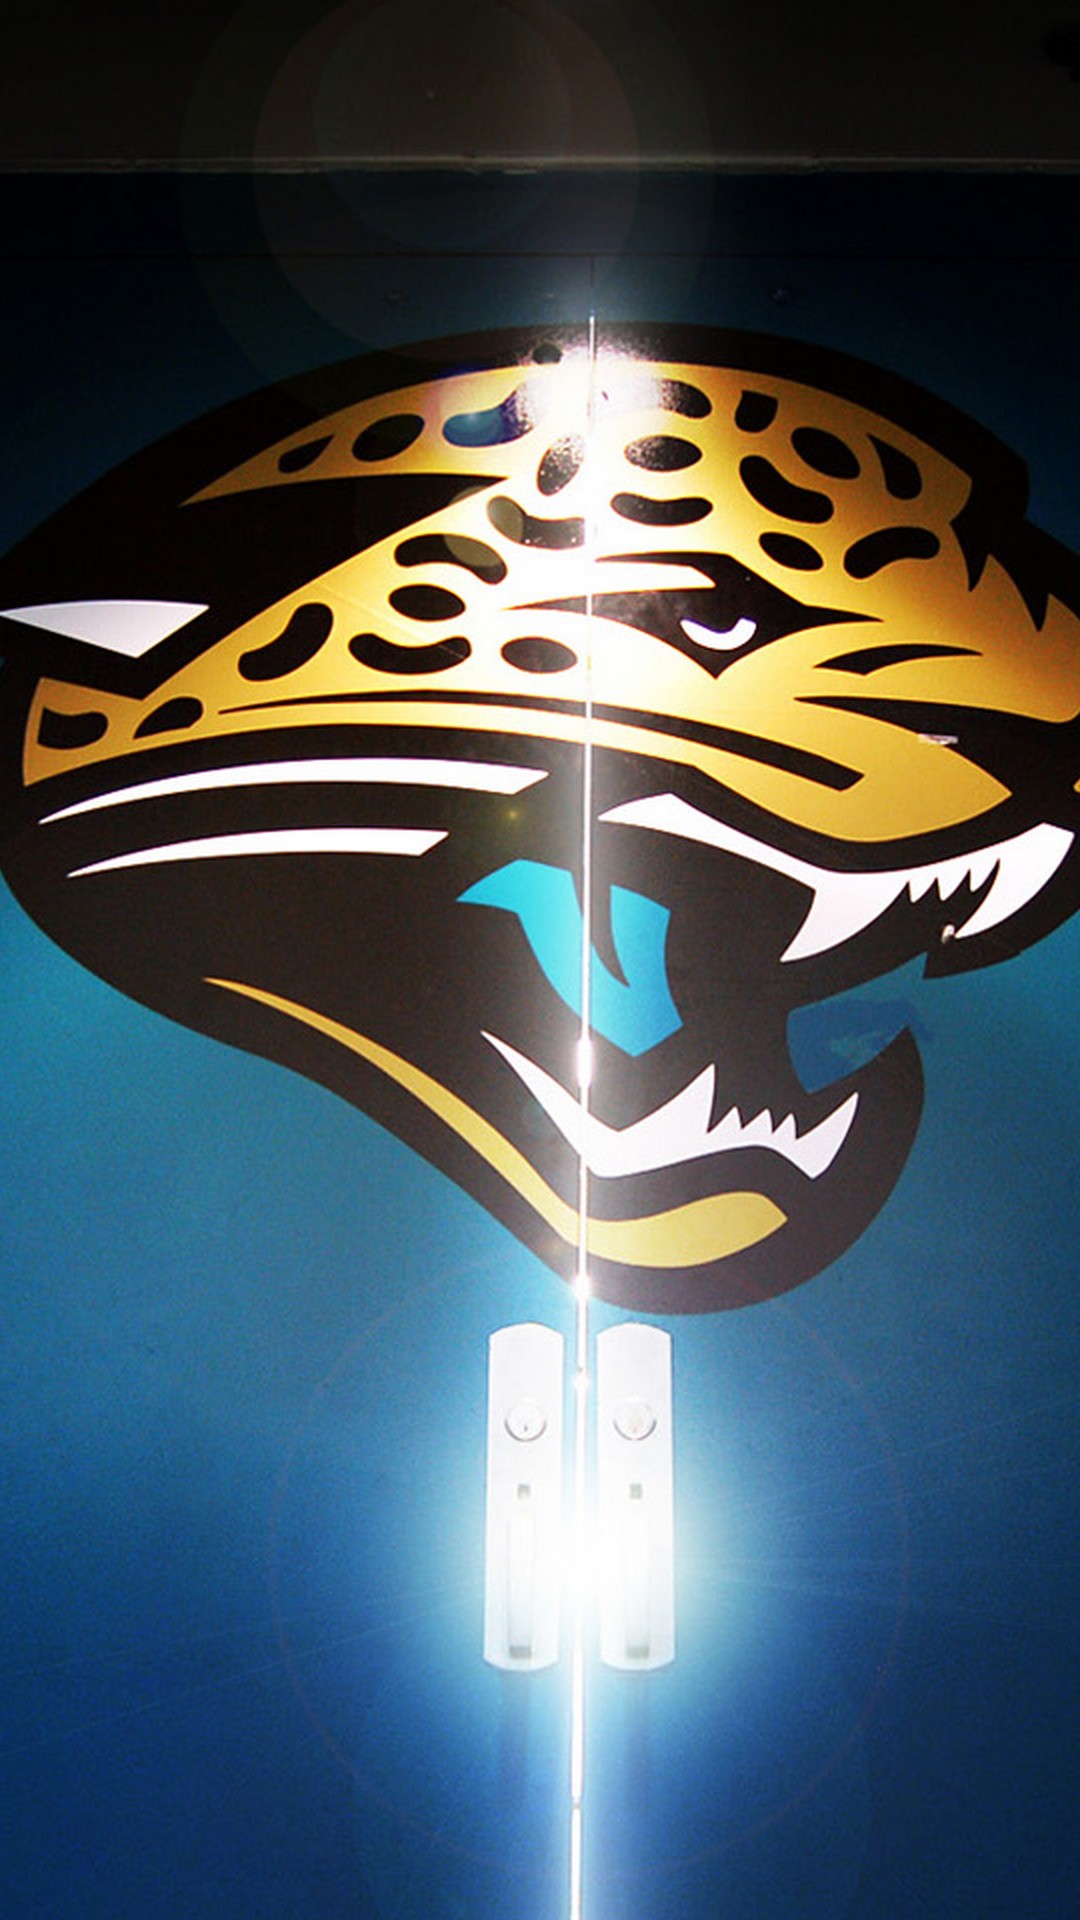 Jacksonville Jaguars NFL iPhone Screen Wallpaper with high-resolution 1080x1920 pixel. Donwload and set as wallpaper for your iPhone X, iPhone XS home screen backgrounds, XS Max, XR, iPhone8 lock screen wallpaper, iPhone 7, 6, SE and other mobile devices